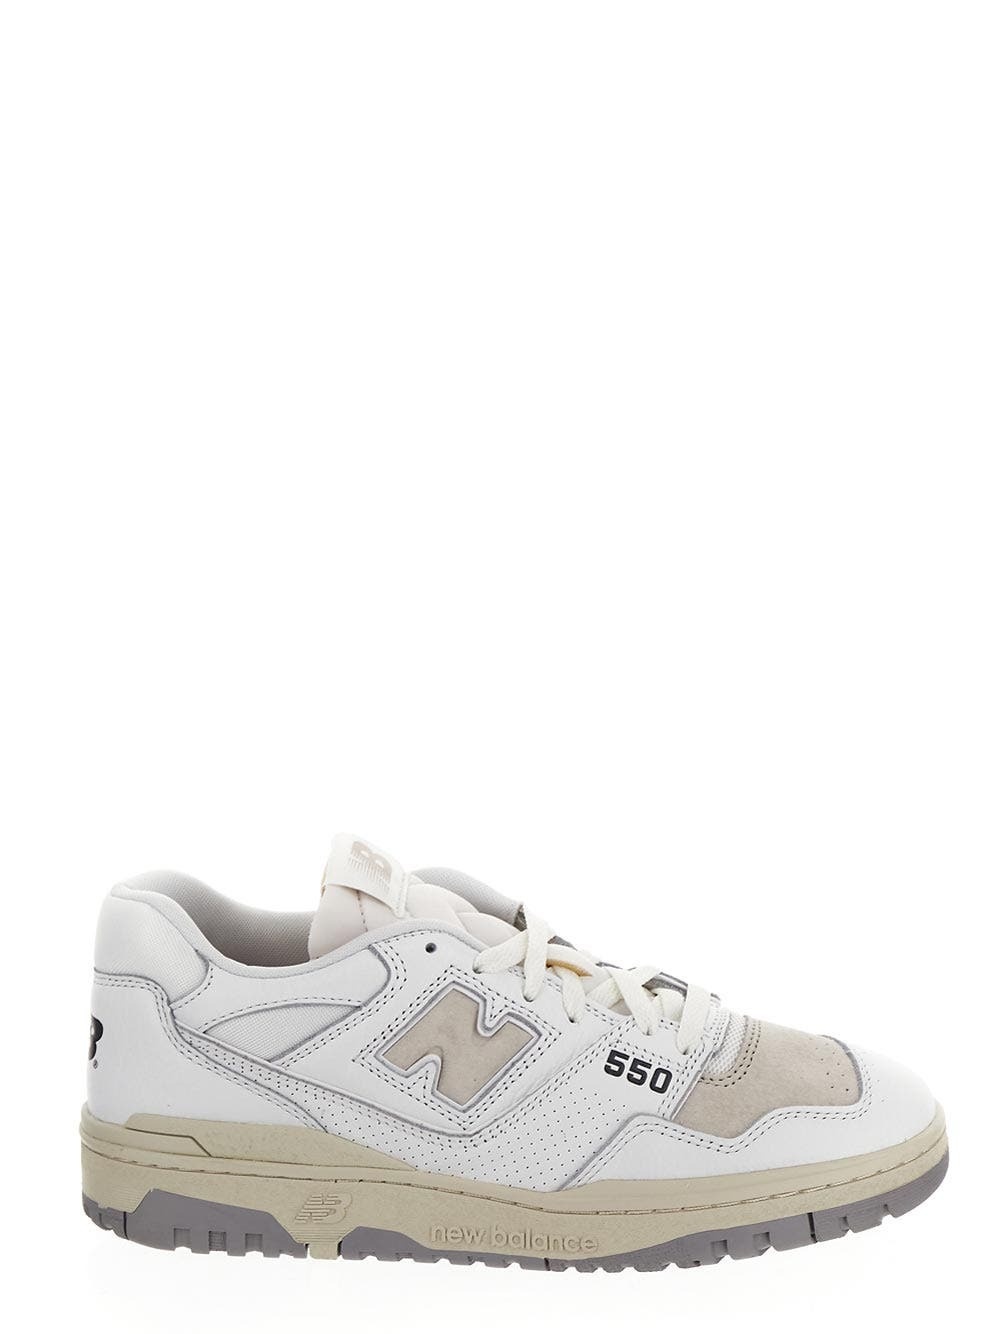 Photo: New Balance 550 Low Top Trainers